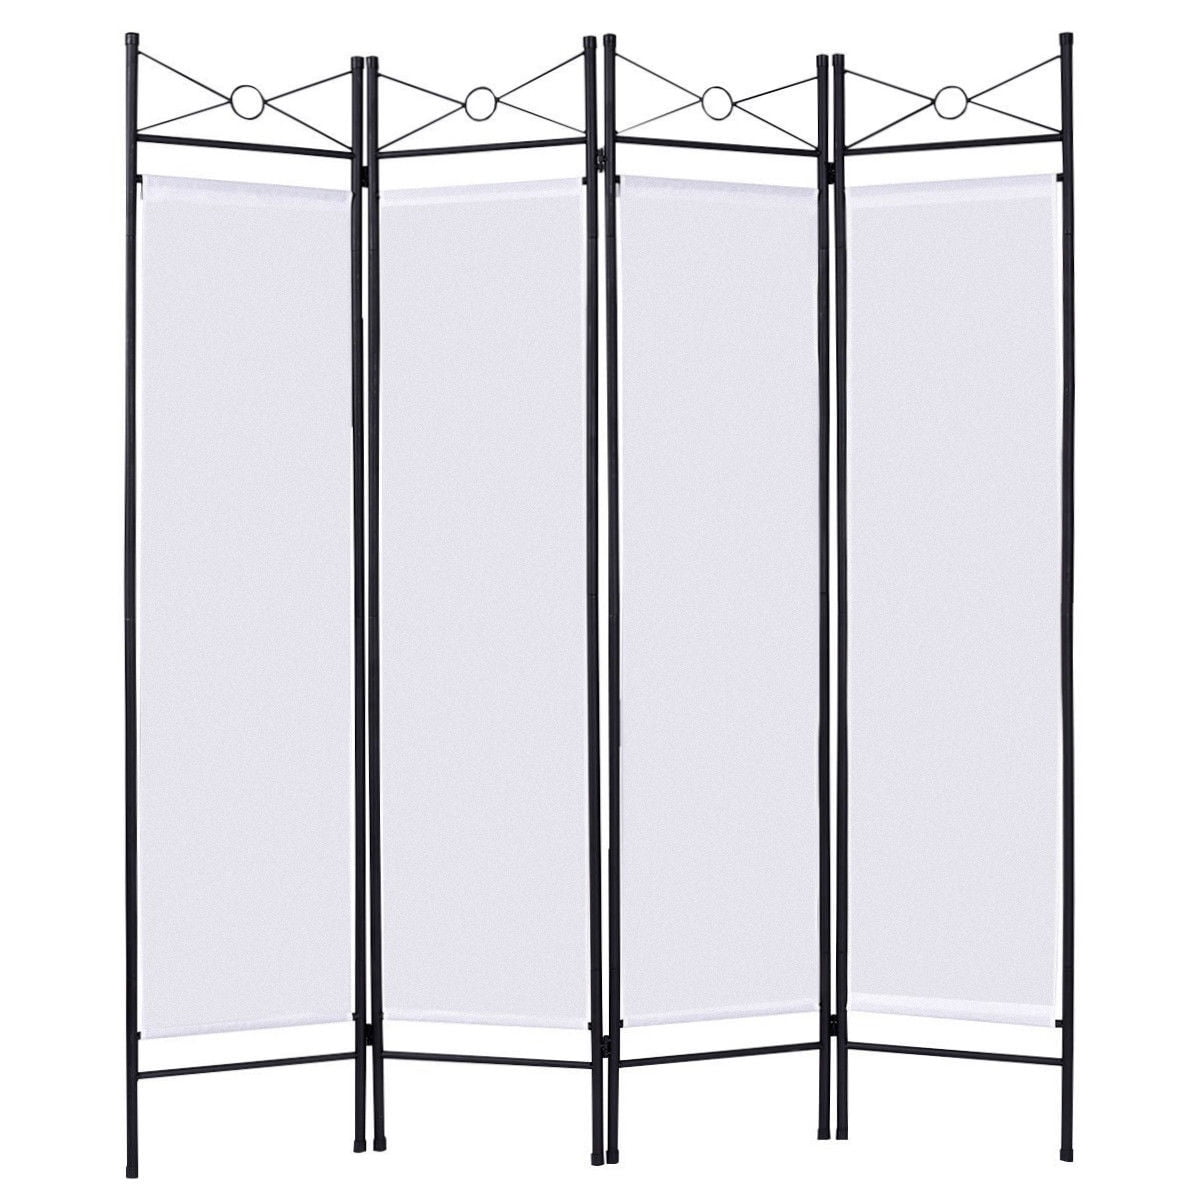 Details about   Black 4 Panel Room Divider Privacy Screen Home Office Fabric Metal Frame